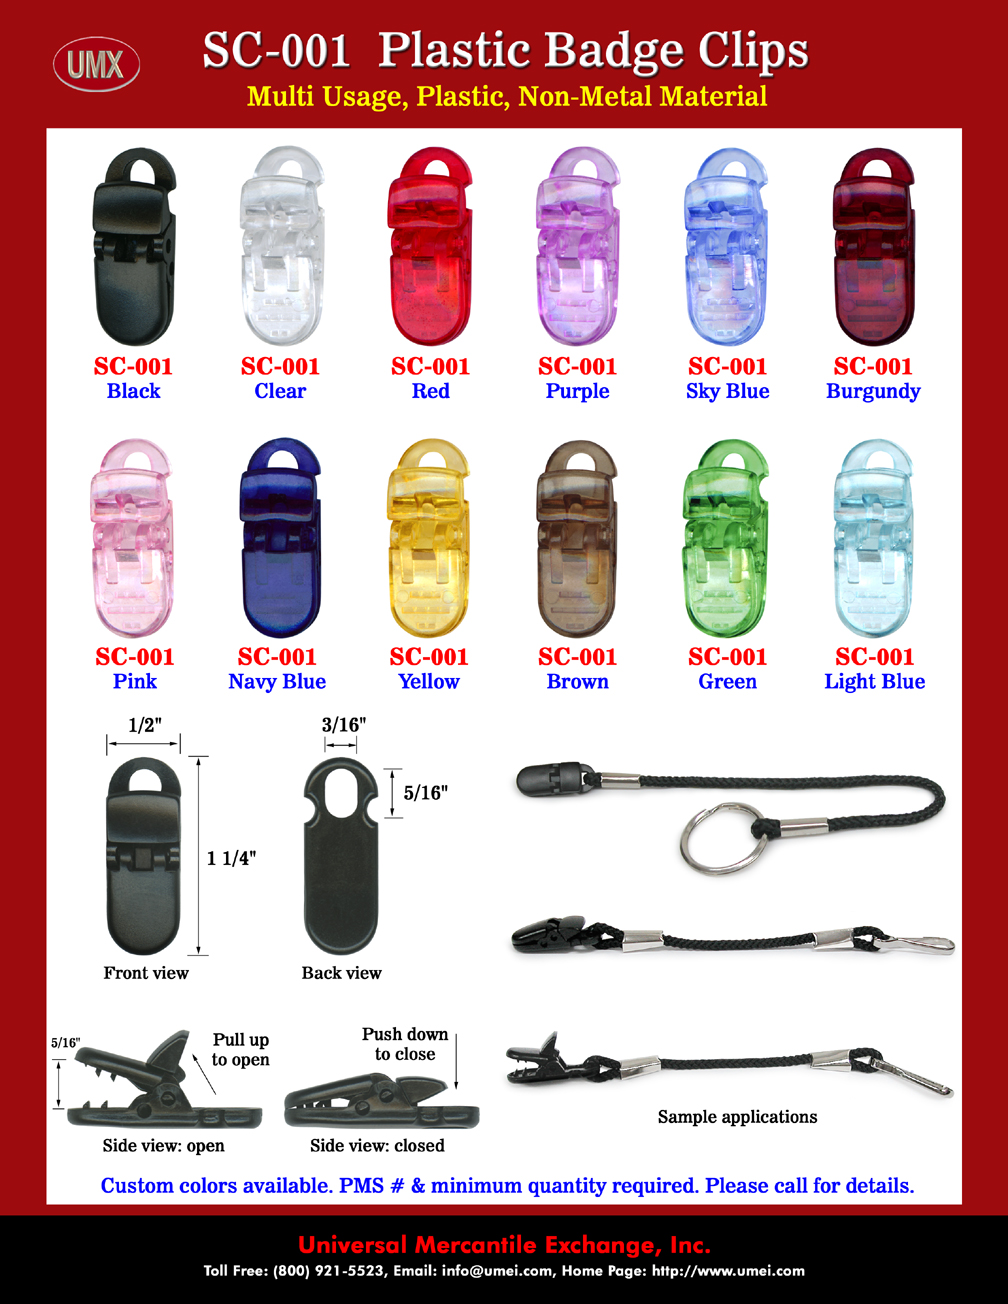 Wholesale Plastic Clips For Badges, Plastic ID Holders Clips, Plastic Name Badges